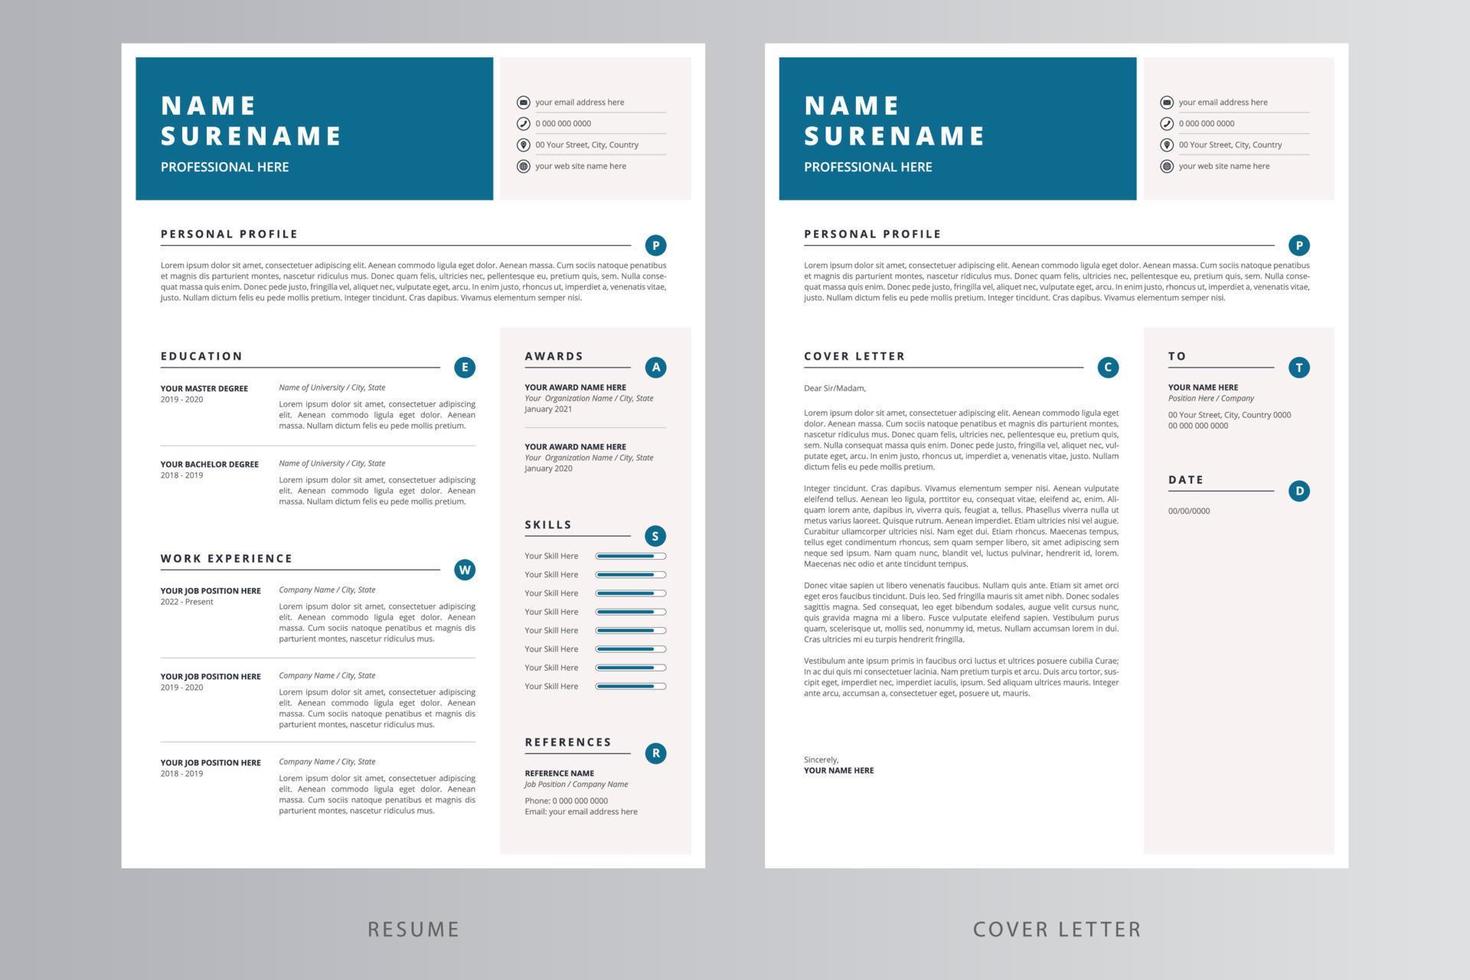 Modern Resume or CV and Cover Letter Template. Pro Vector